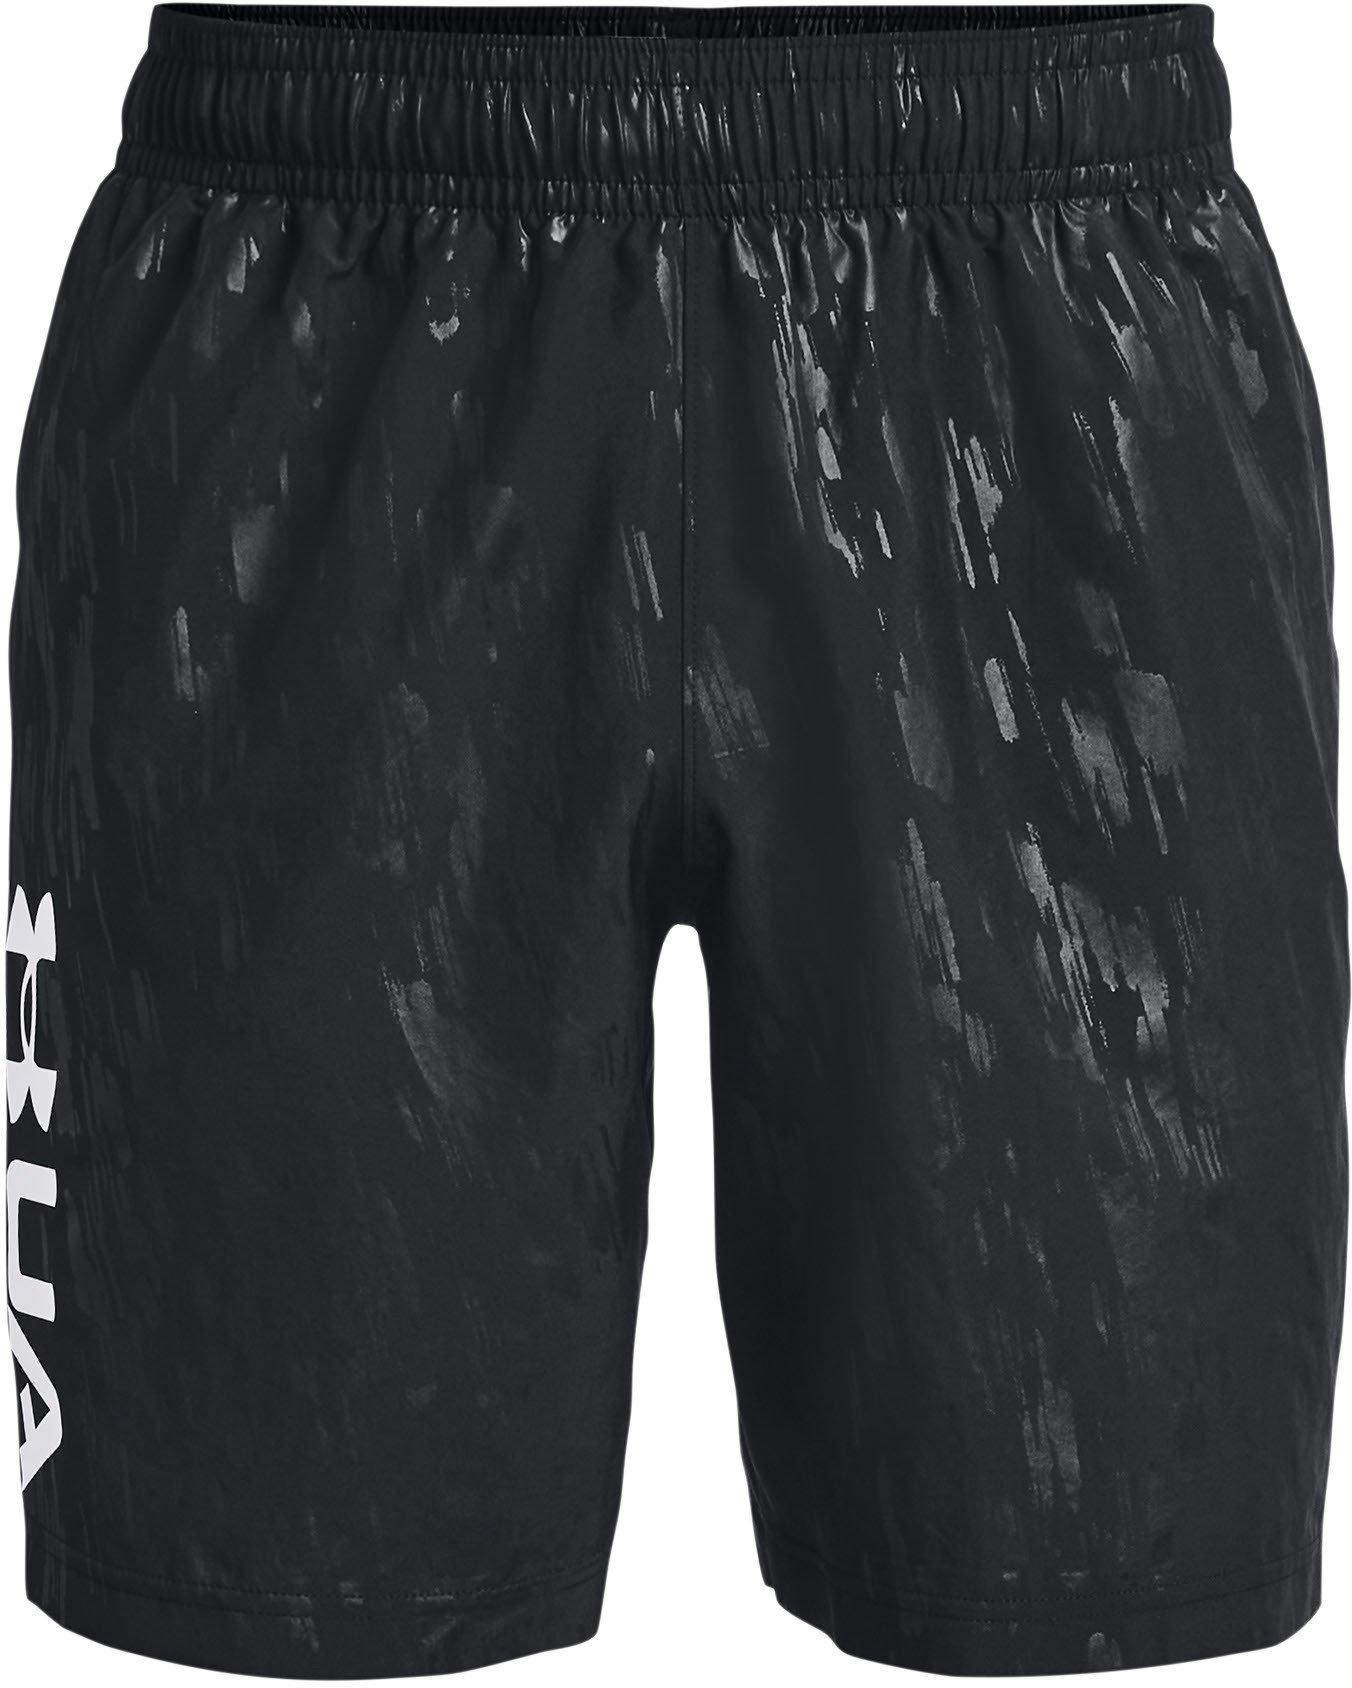 Under Armour Woven Emboss Shorts-BLK S